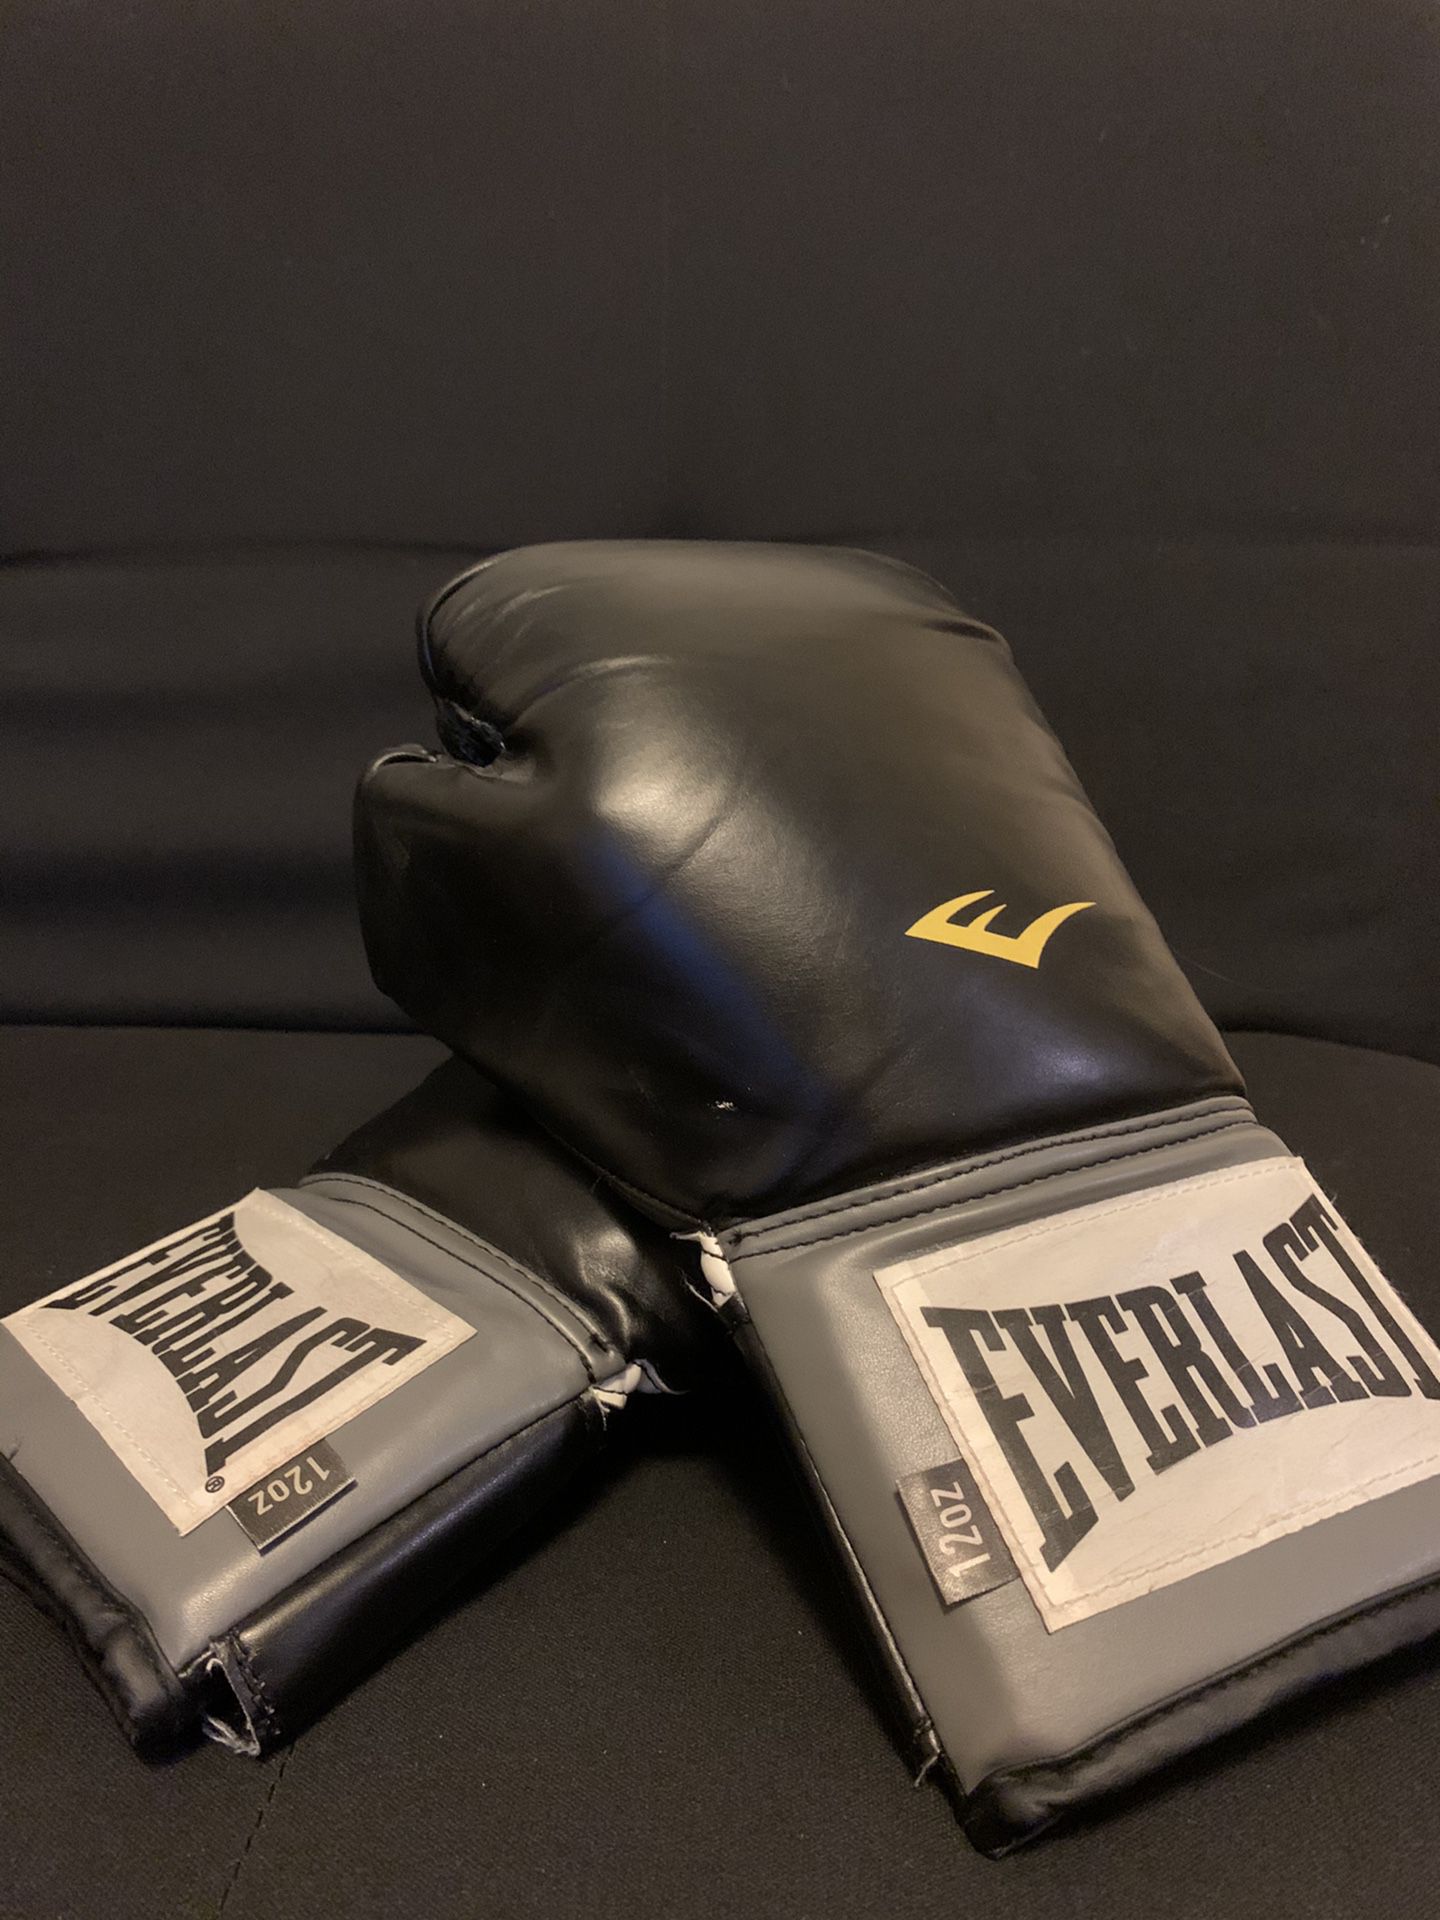 Everlast boxing gloves 12oz (good condition)